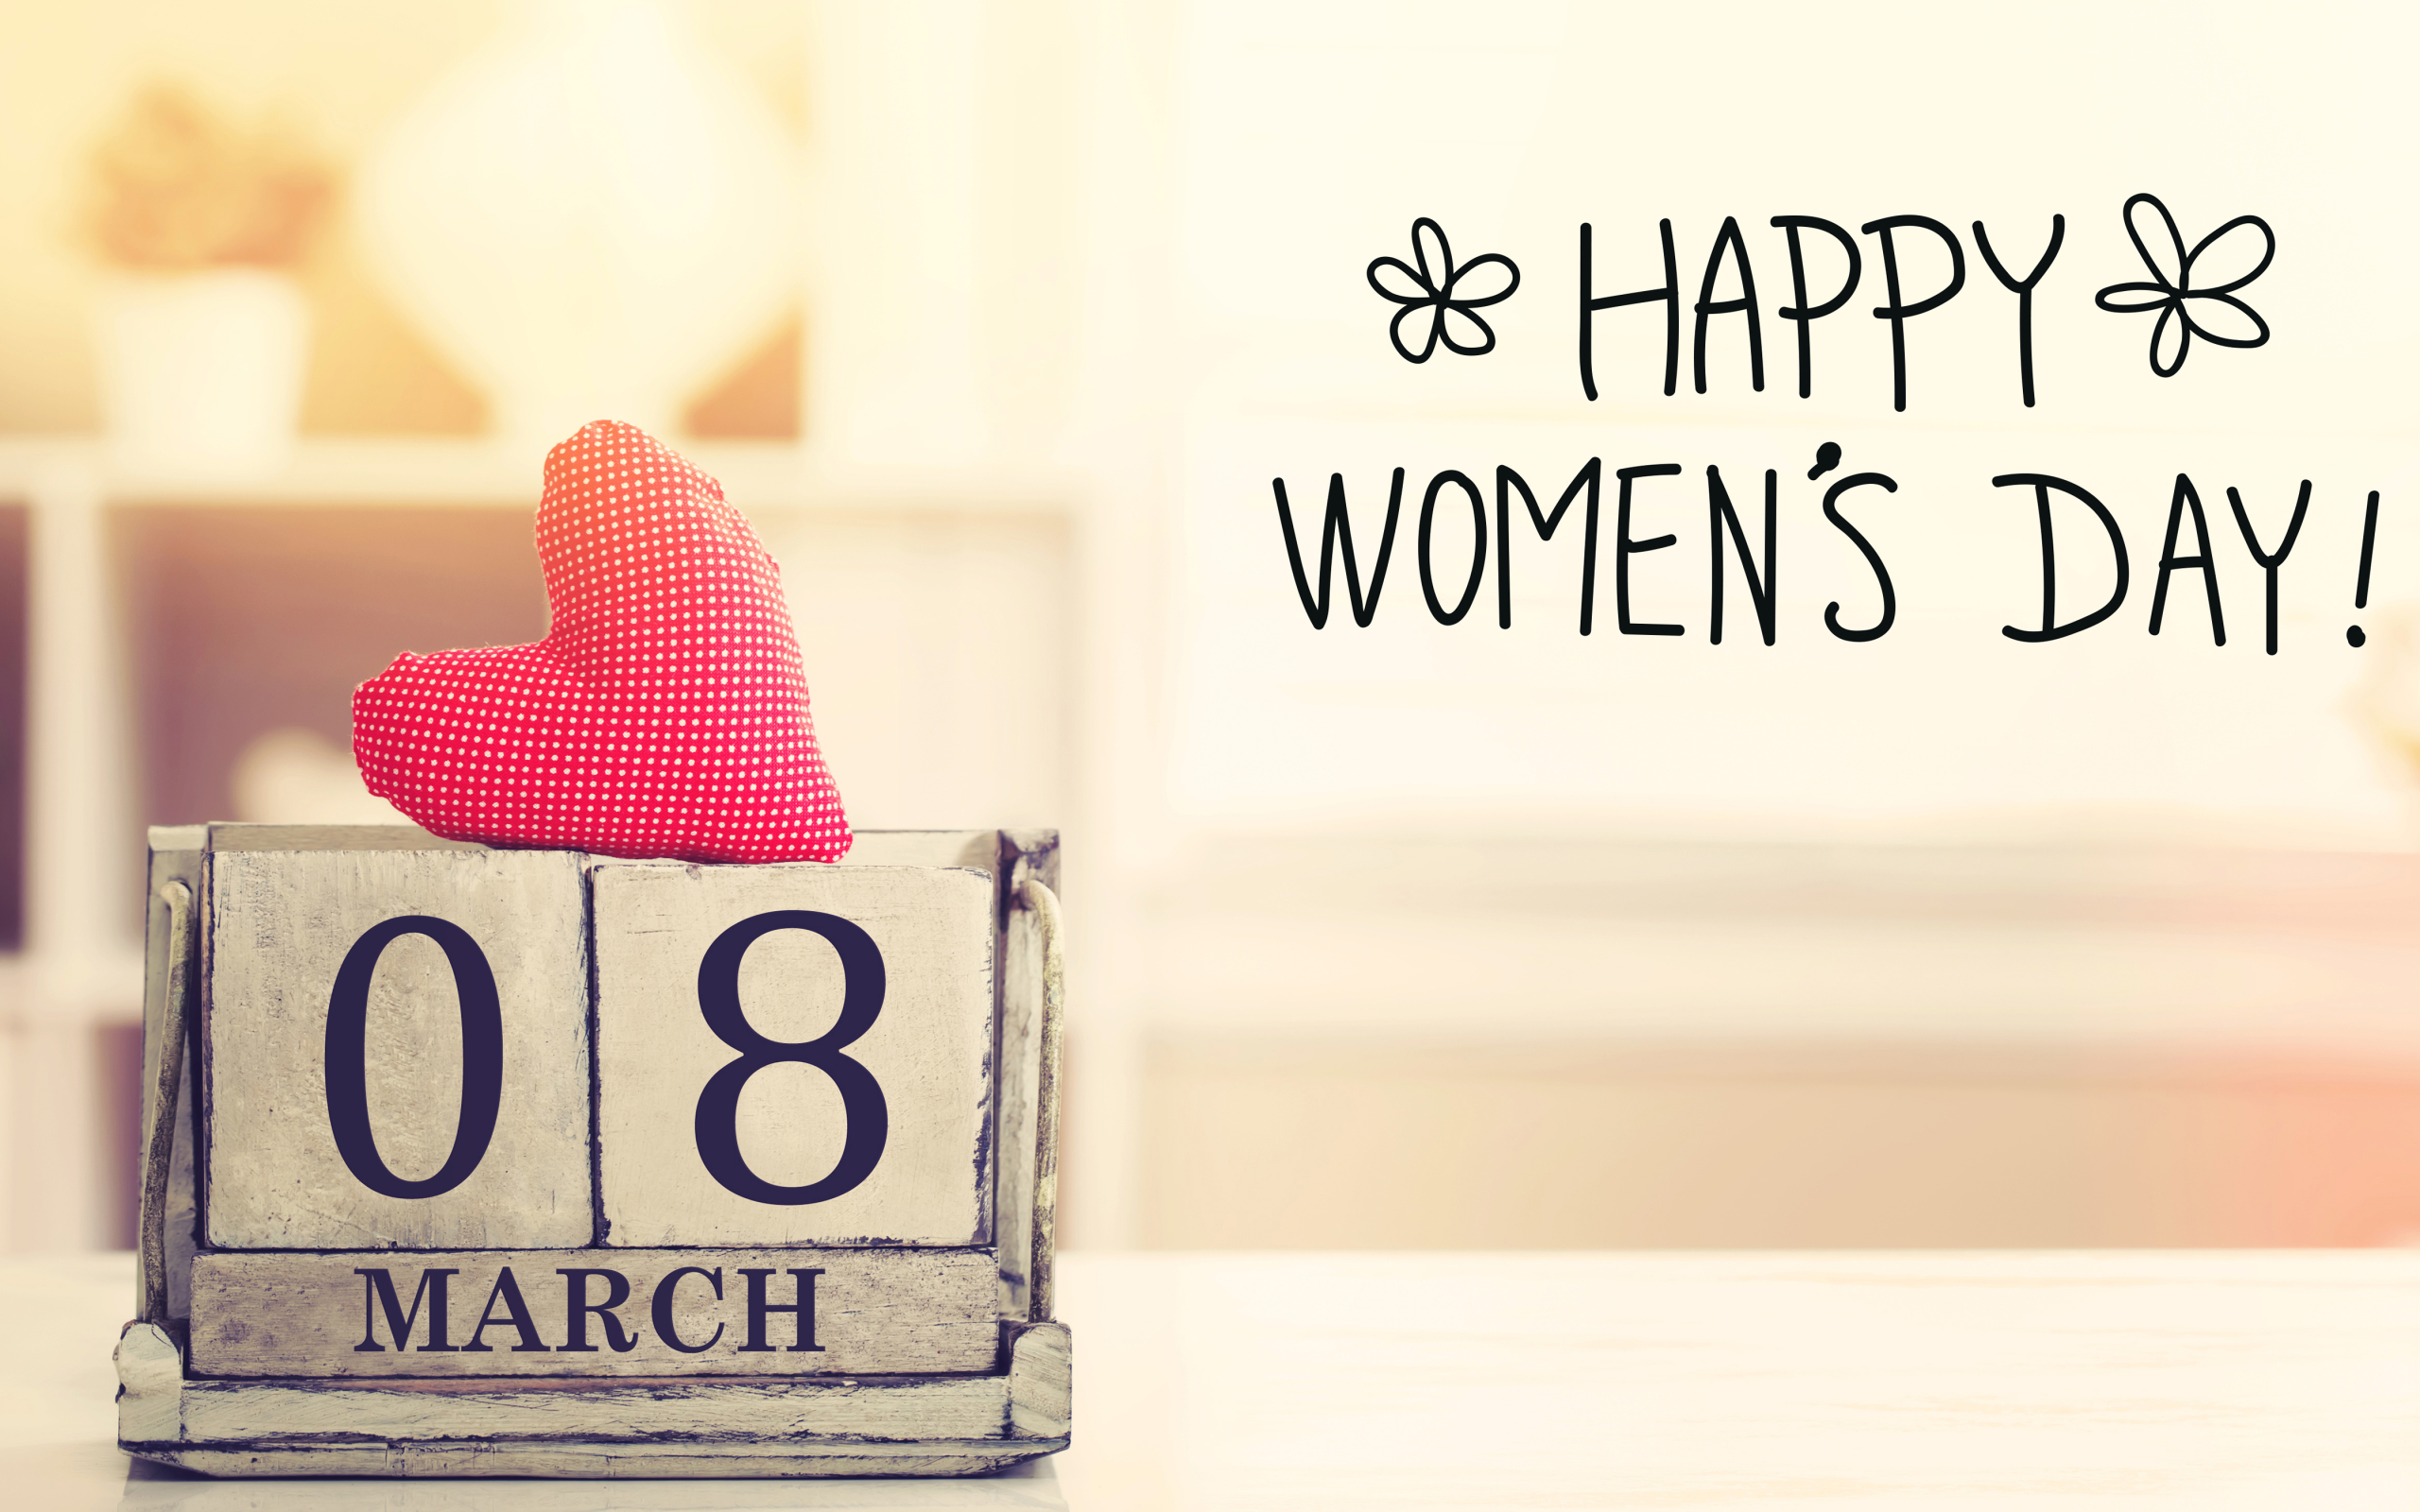 Wallpaper Of Happy Women S Day, Woman S Day Background - Happy Valentine's Day 14 Feb - HD Wallpaper 